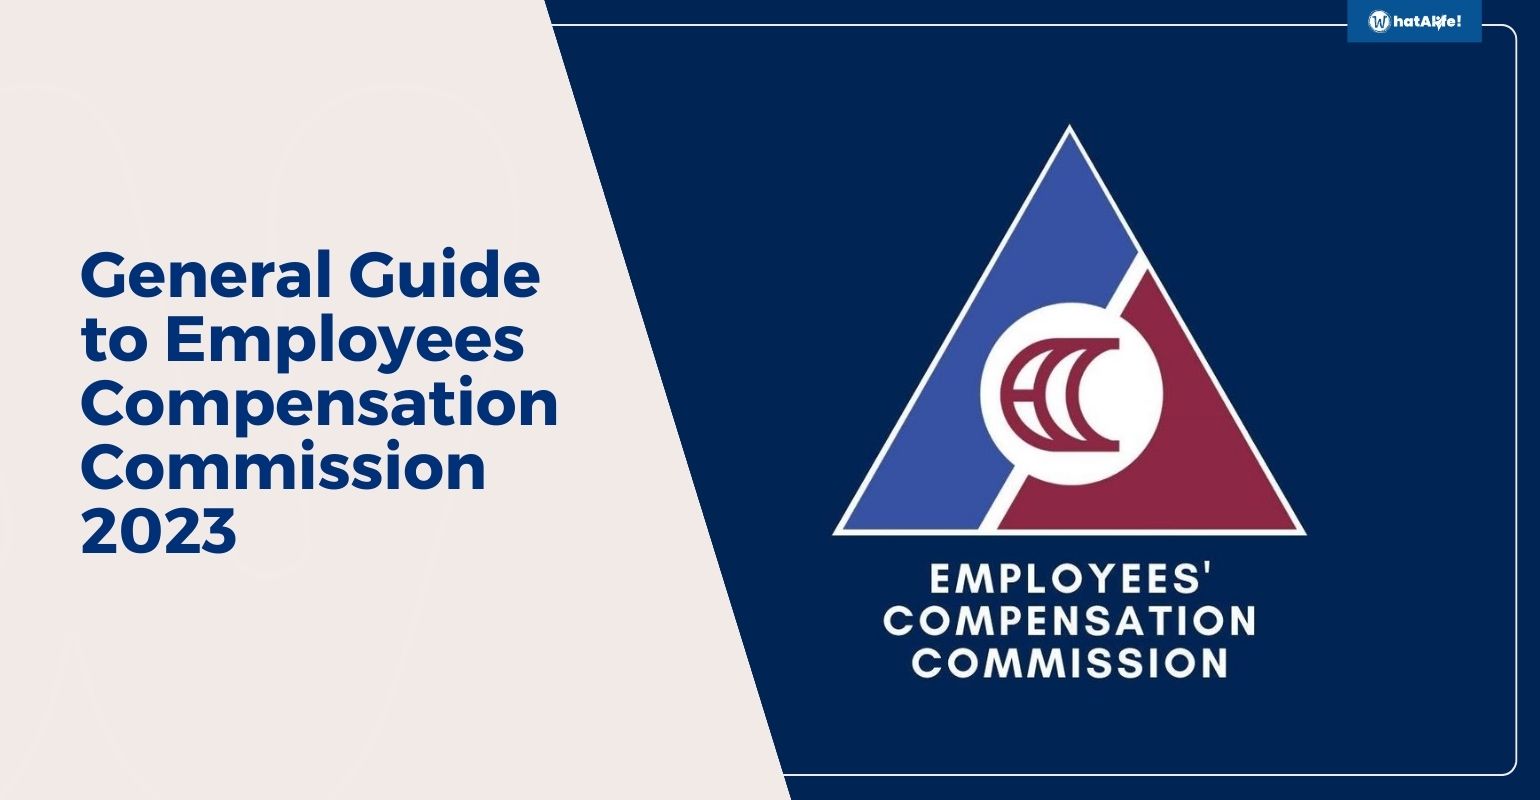 A General Guide to Employees Compensation Program